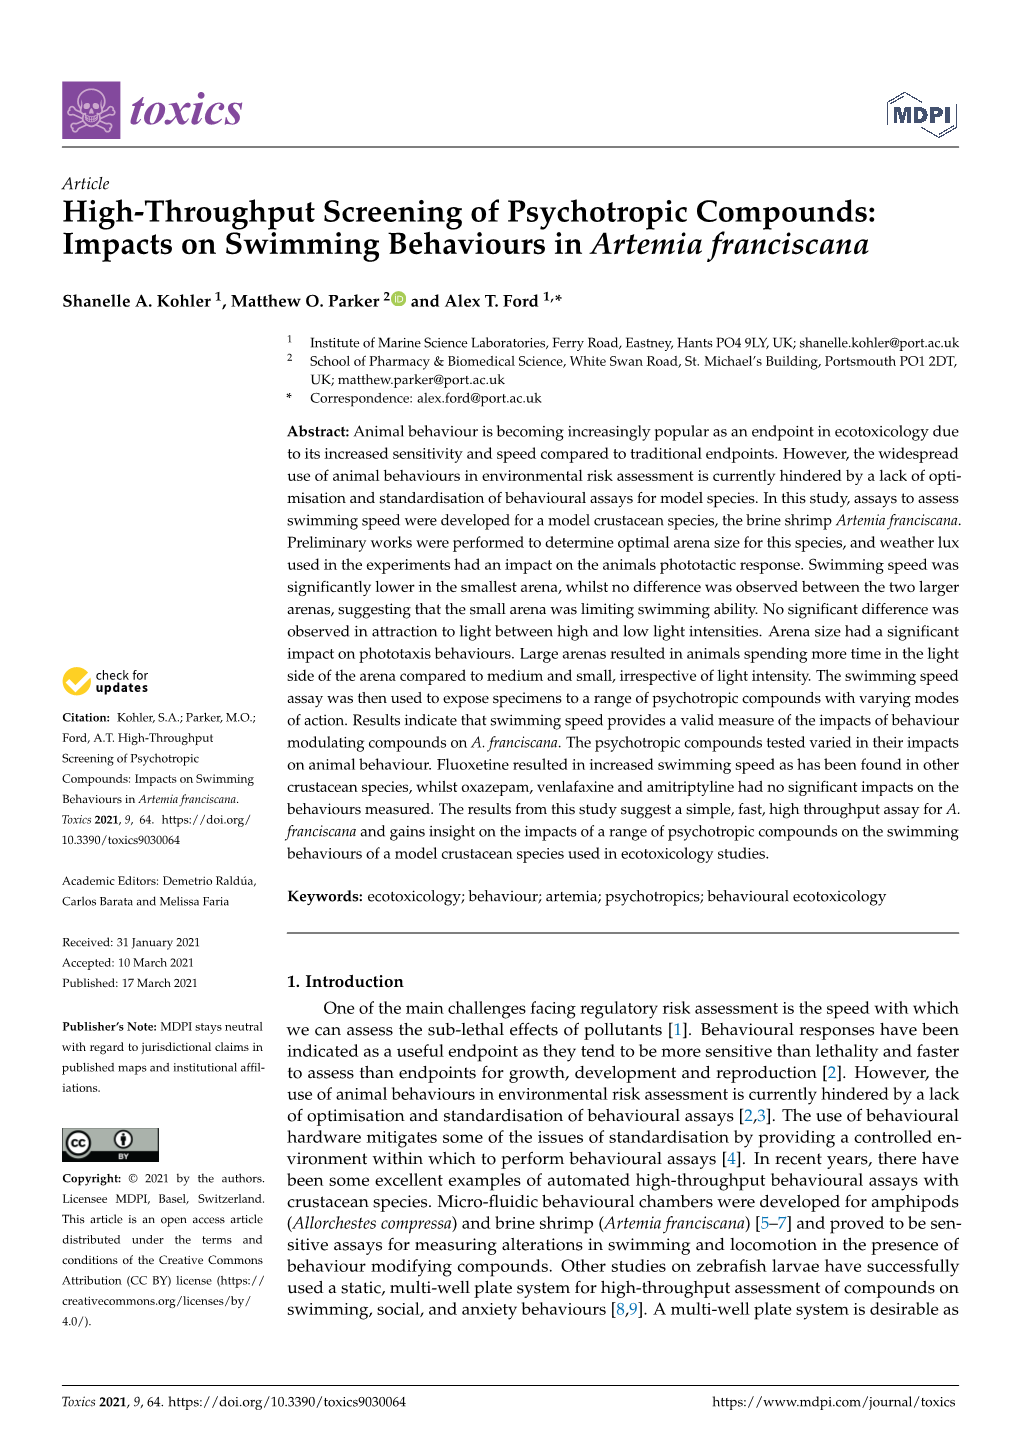 Impacts on Swimming Behaviours in Artemia Franciscana